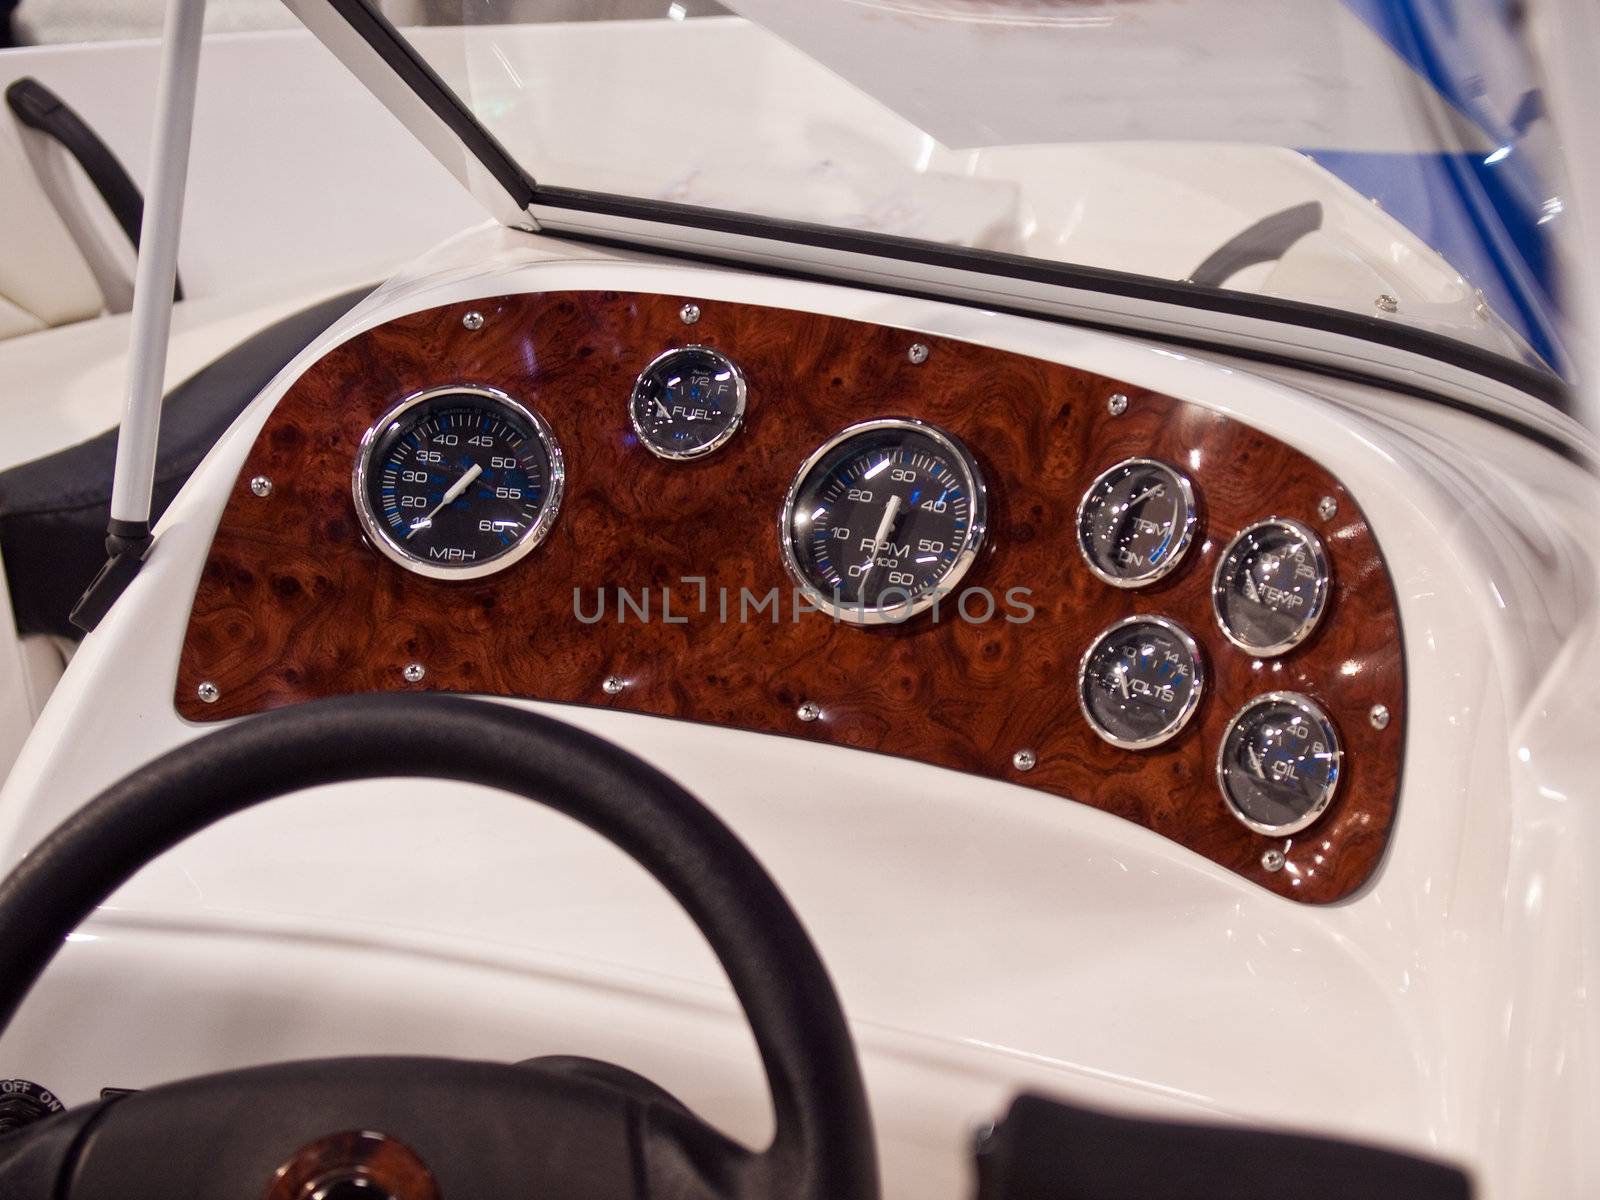 Dashboard instruments panel of a speedboat by Ronyzmbow